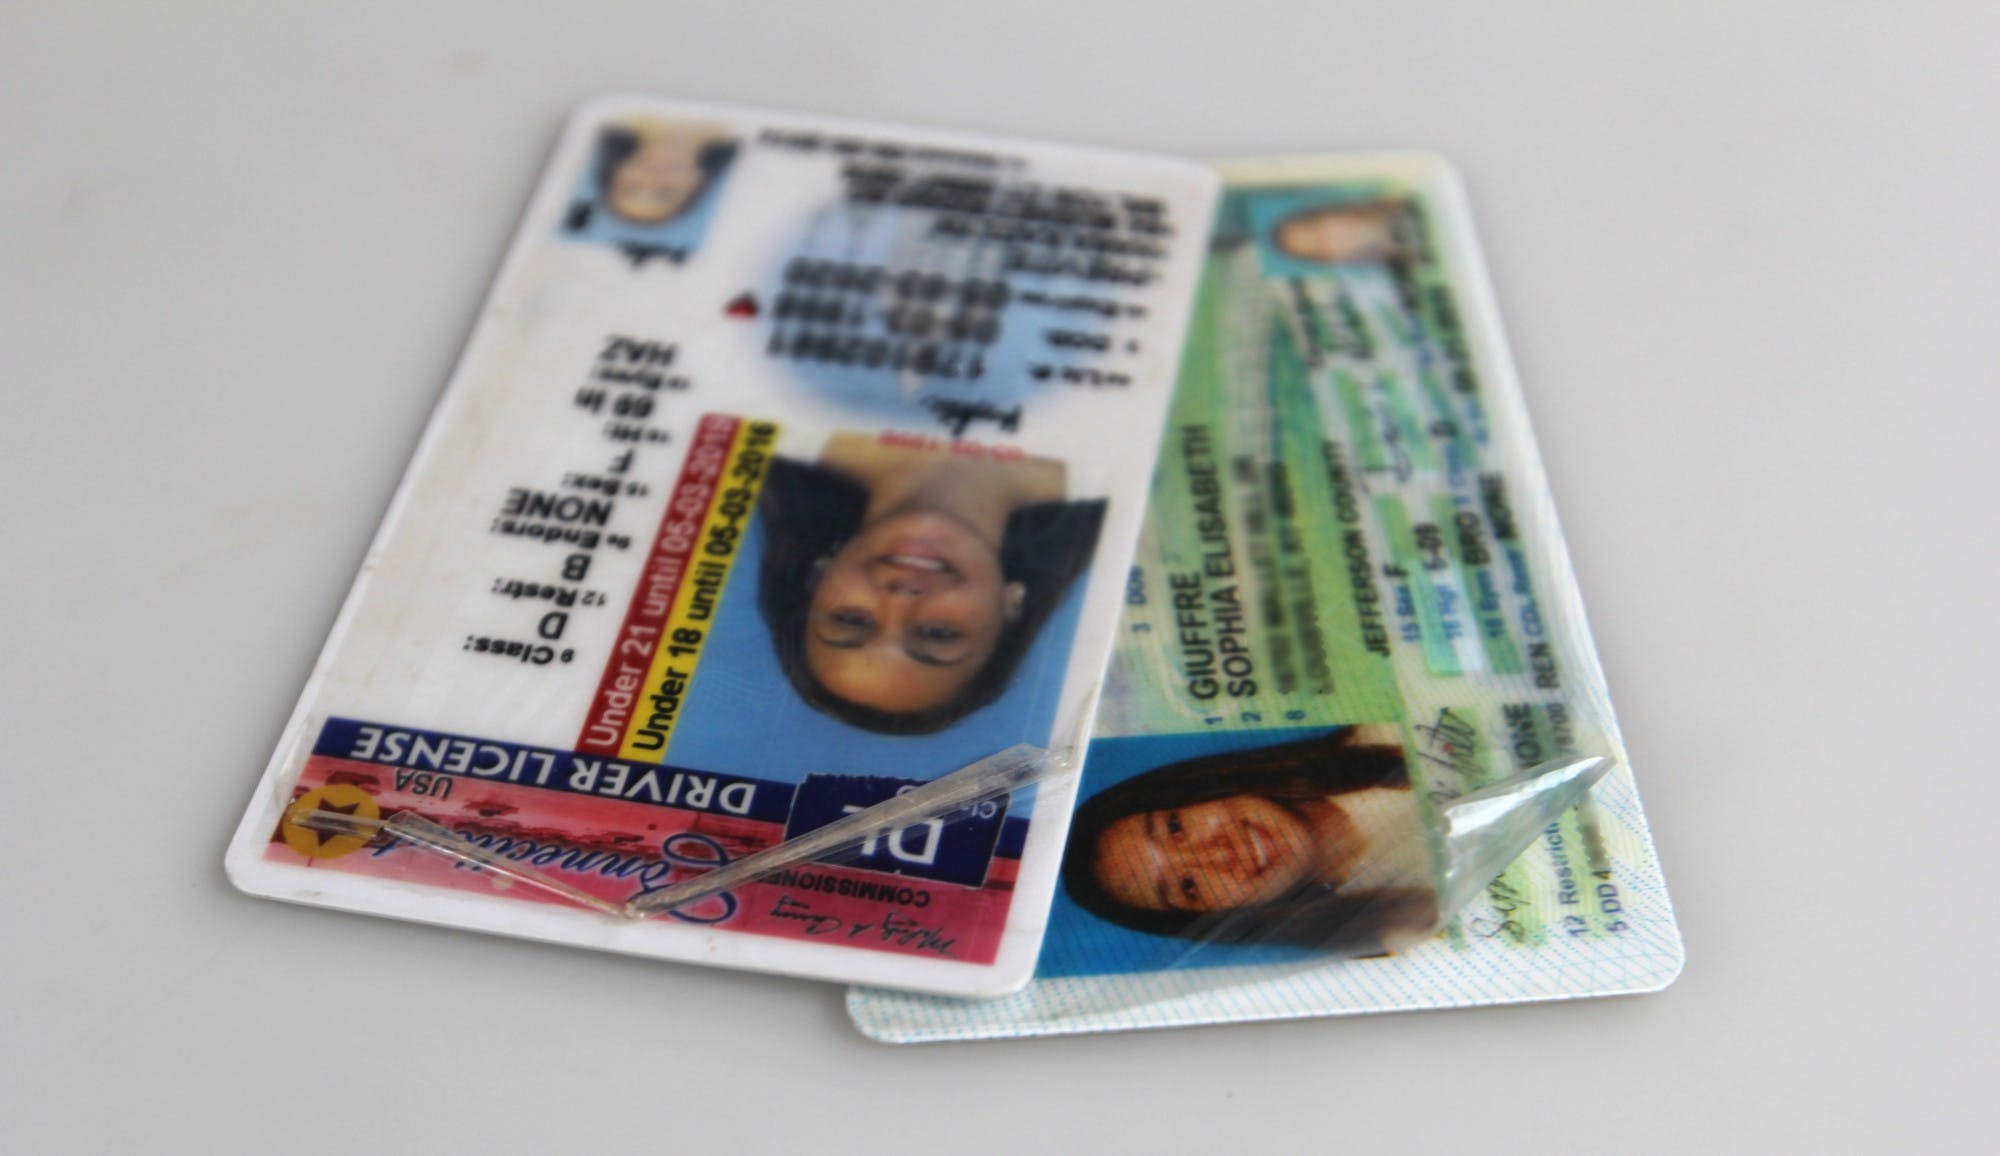 Kentucky Scannable Fake Id Charges